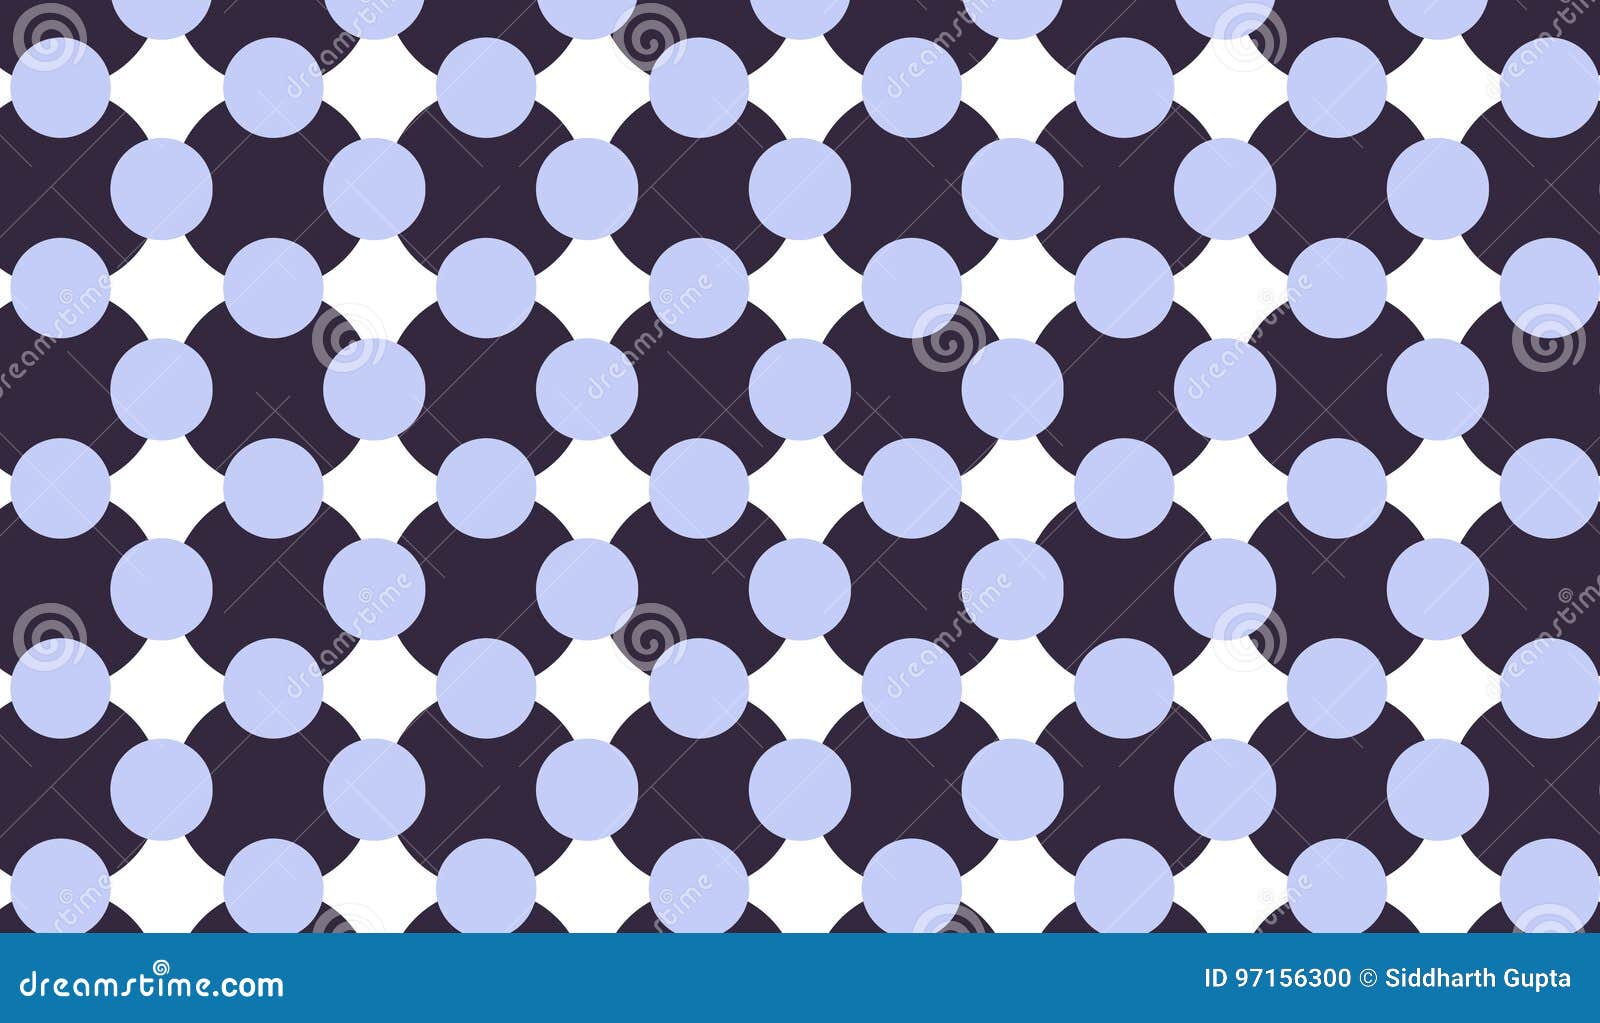 https://thumbs.dreamstime.com/z/simple-modern-abstract-blue-circle-checkered-pattern-trending-use-decor-antiques-97156300.jpg